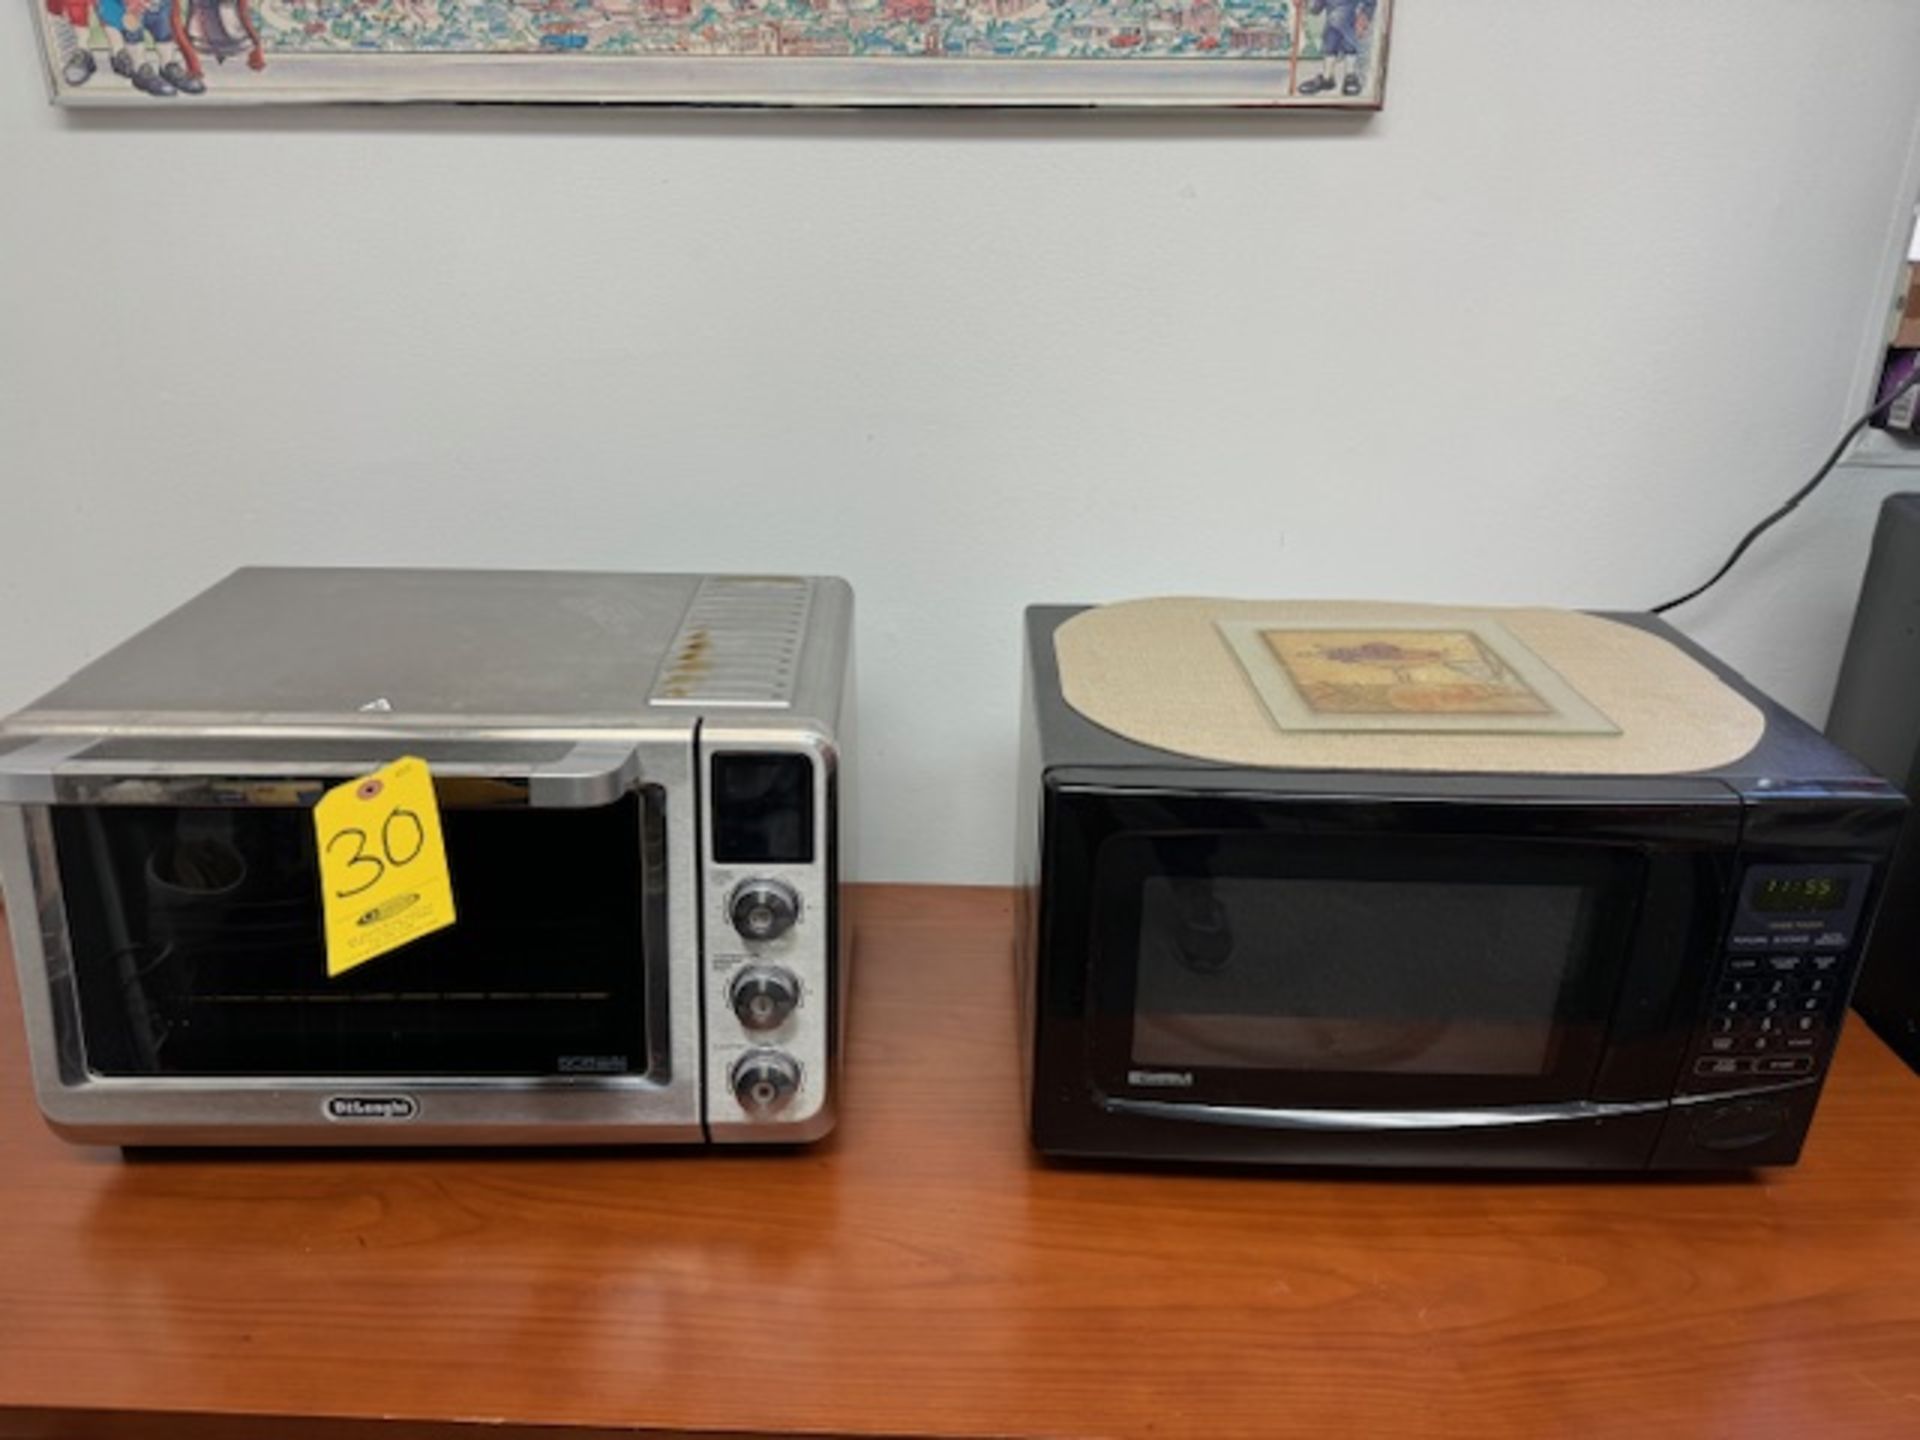 DELONGHI TOASTER OVEN AND KEMORE MICROWAVE (Located in Willow Grove, PA)